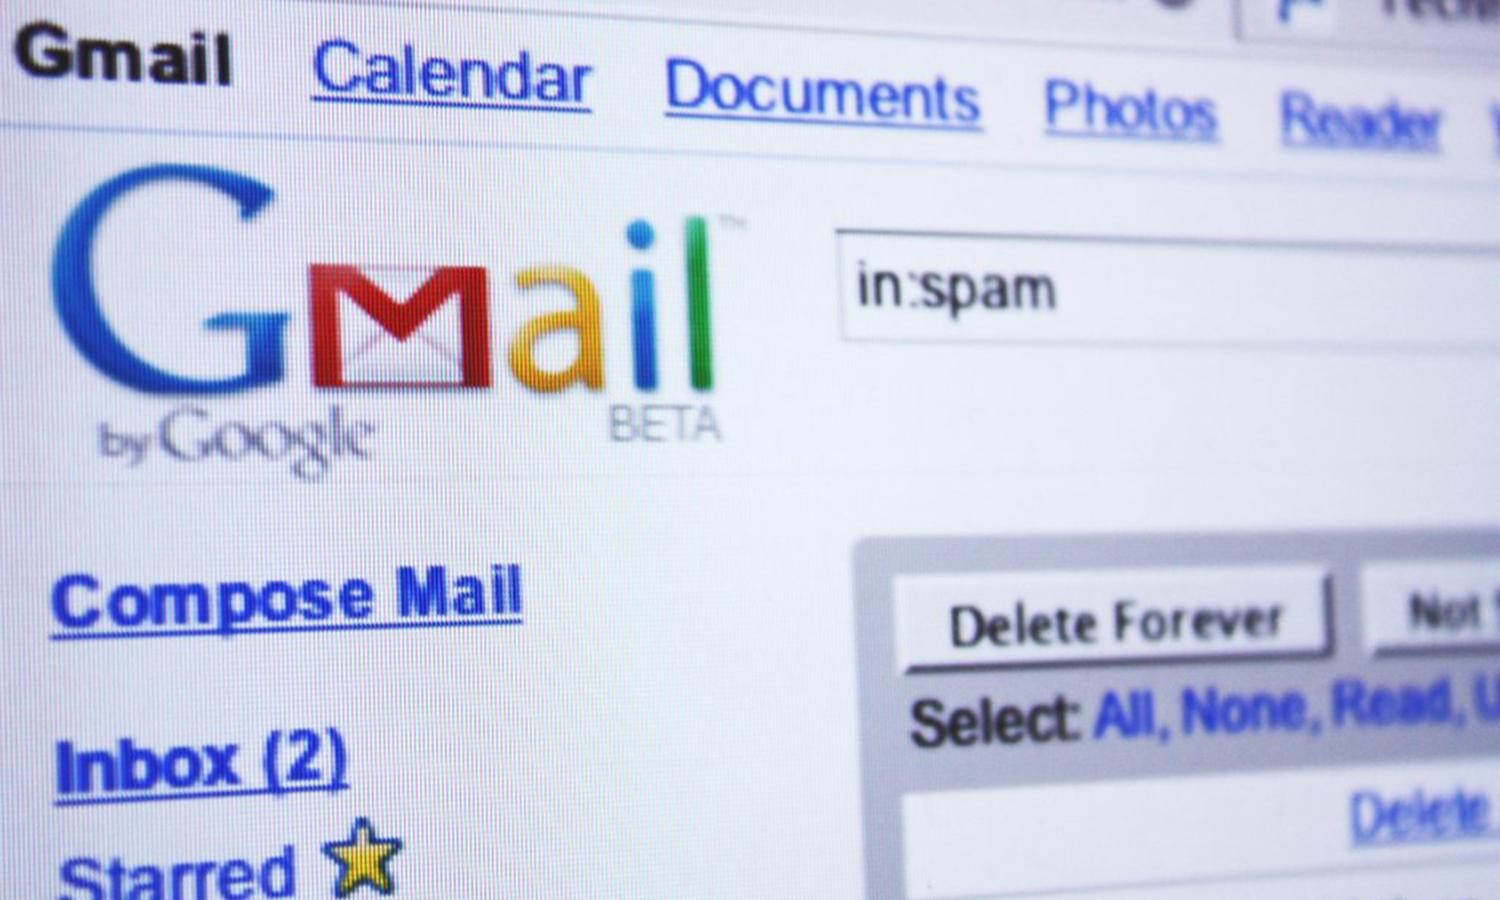 A Gmail inbox is seen on a computer screen